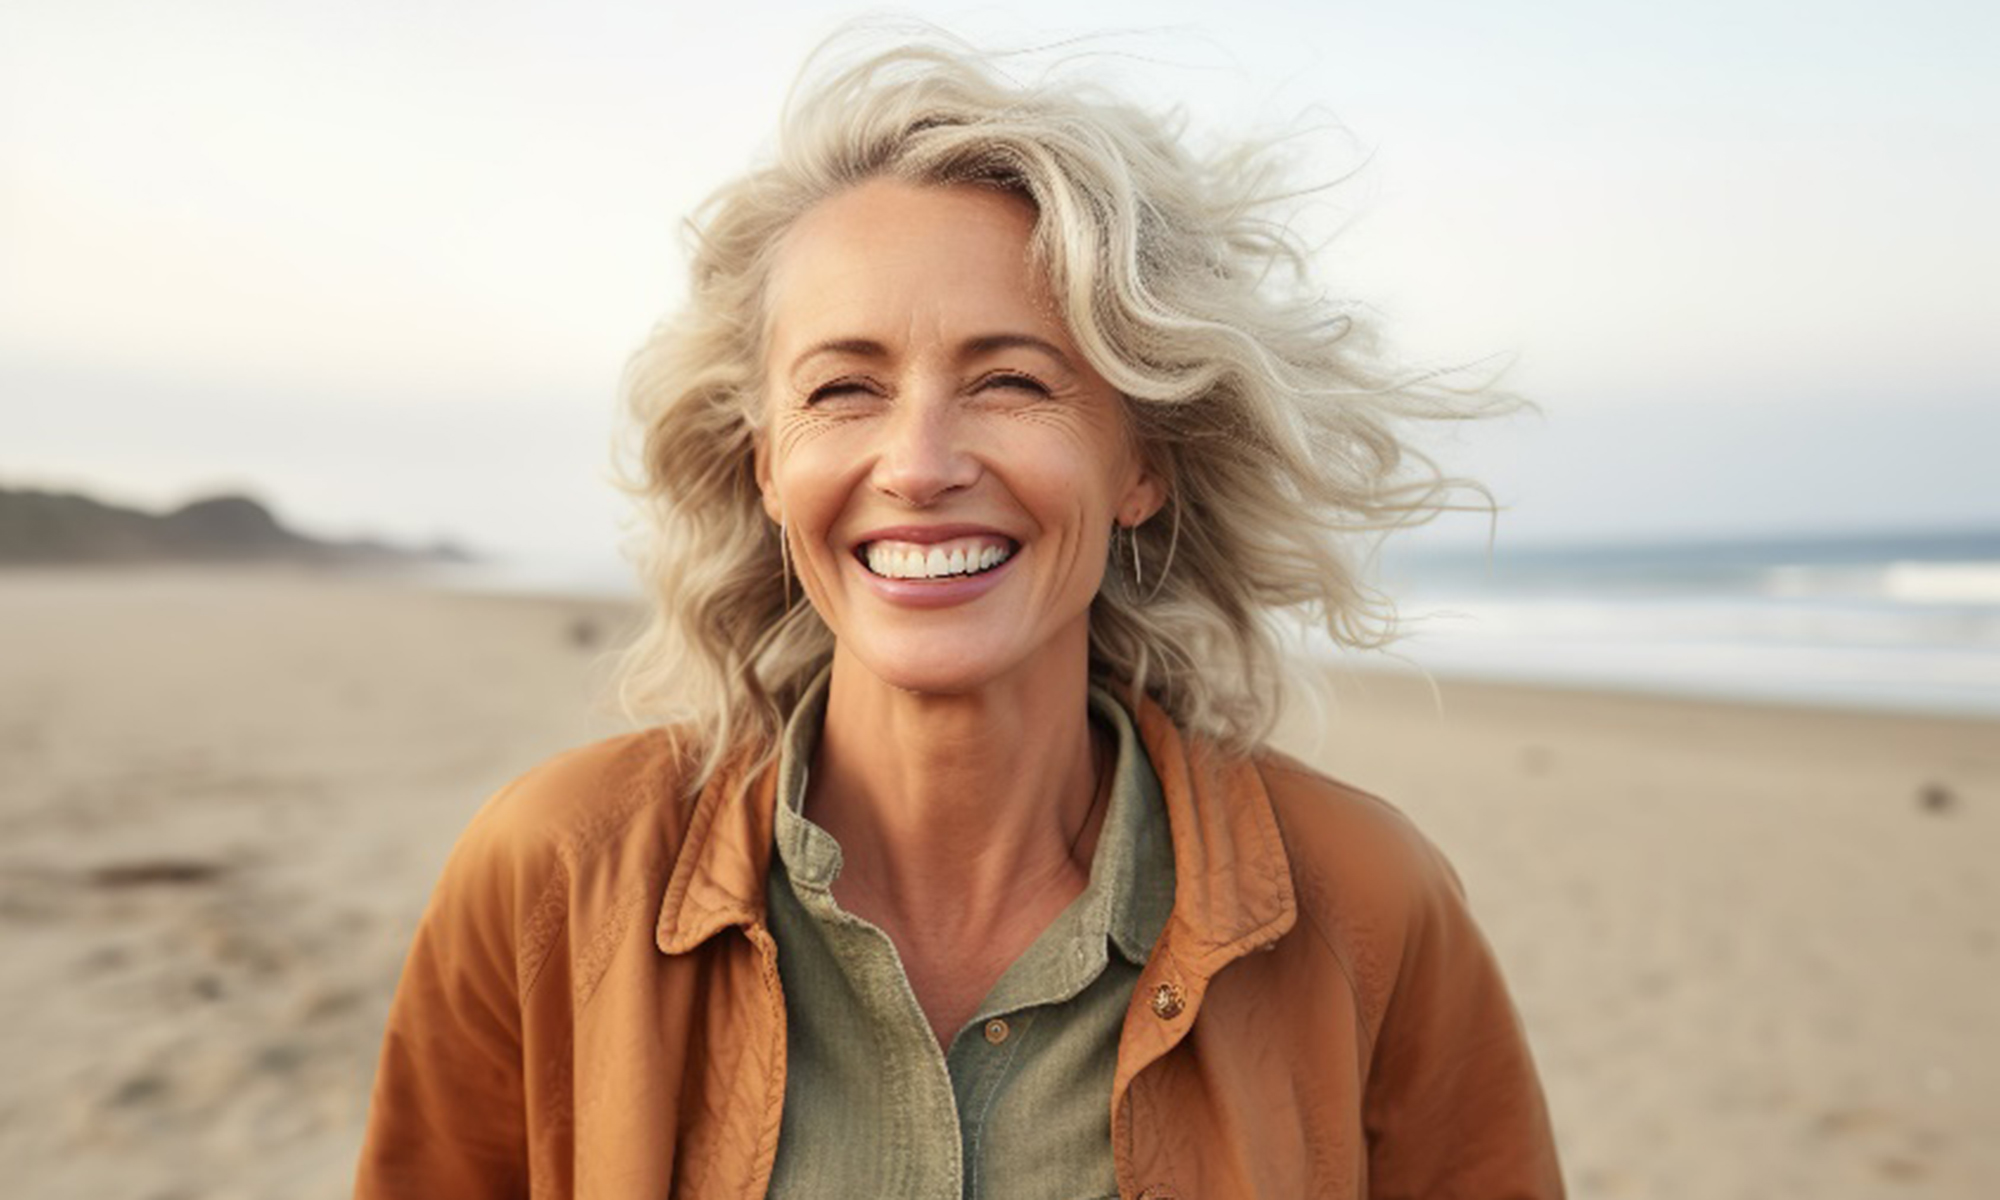 Mature woman in brown jacket smiling while walking on beach